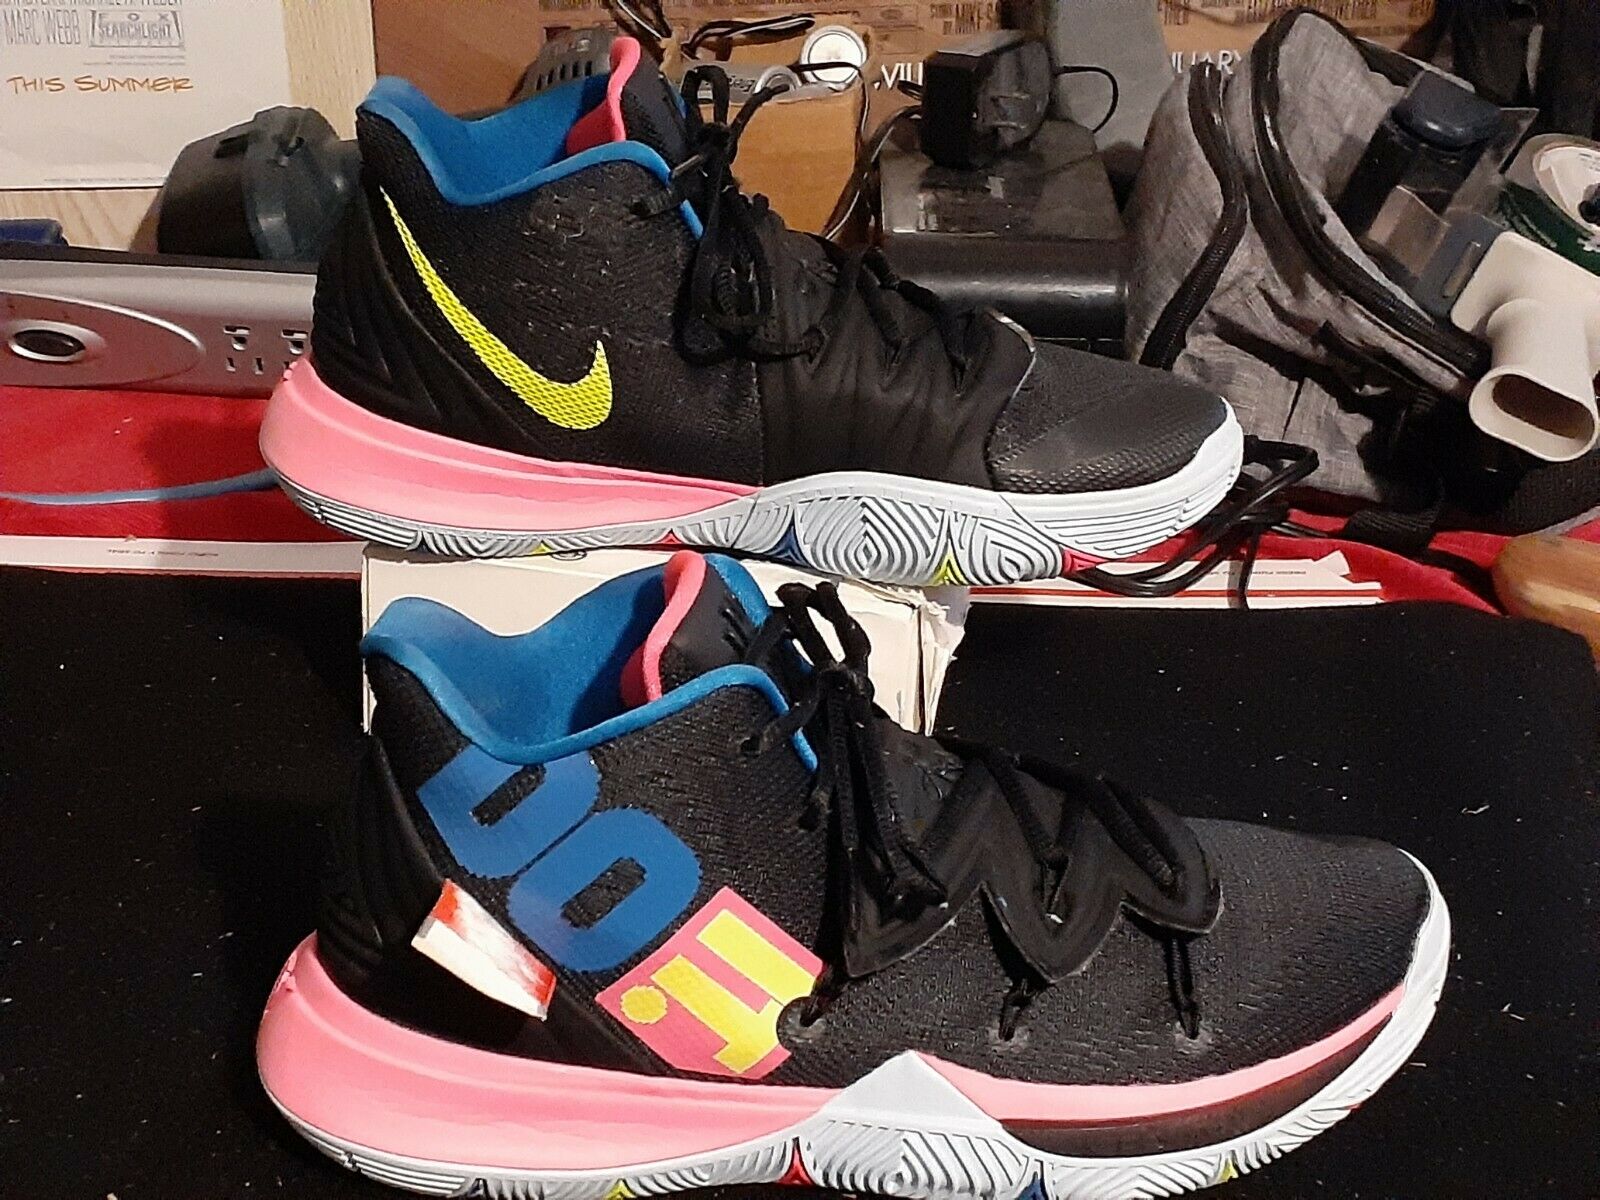 Nike Kyrie 5 Just Do It 2019 Black Pink Mens basketball shoes size 10 A02918-003